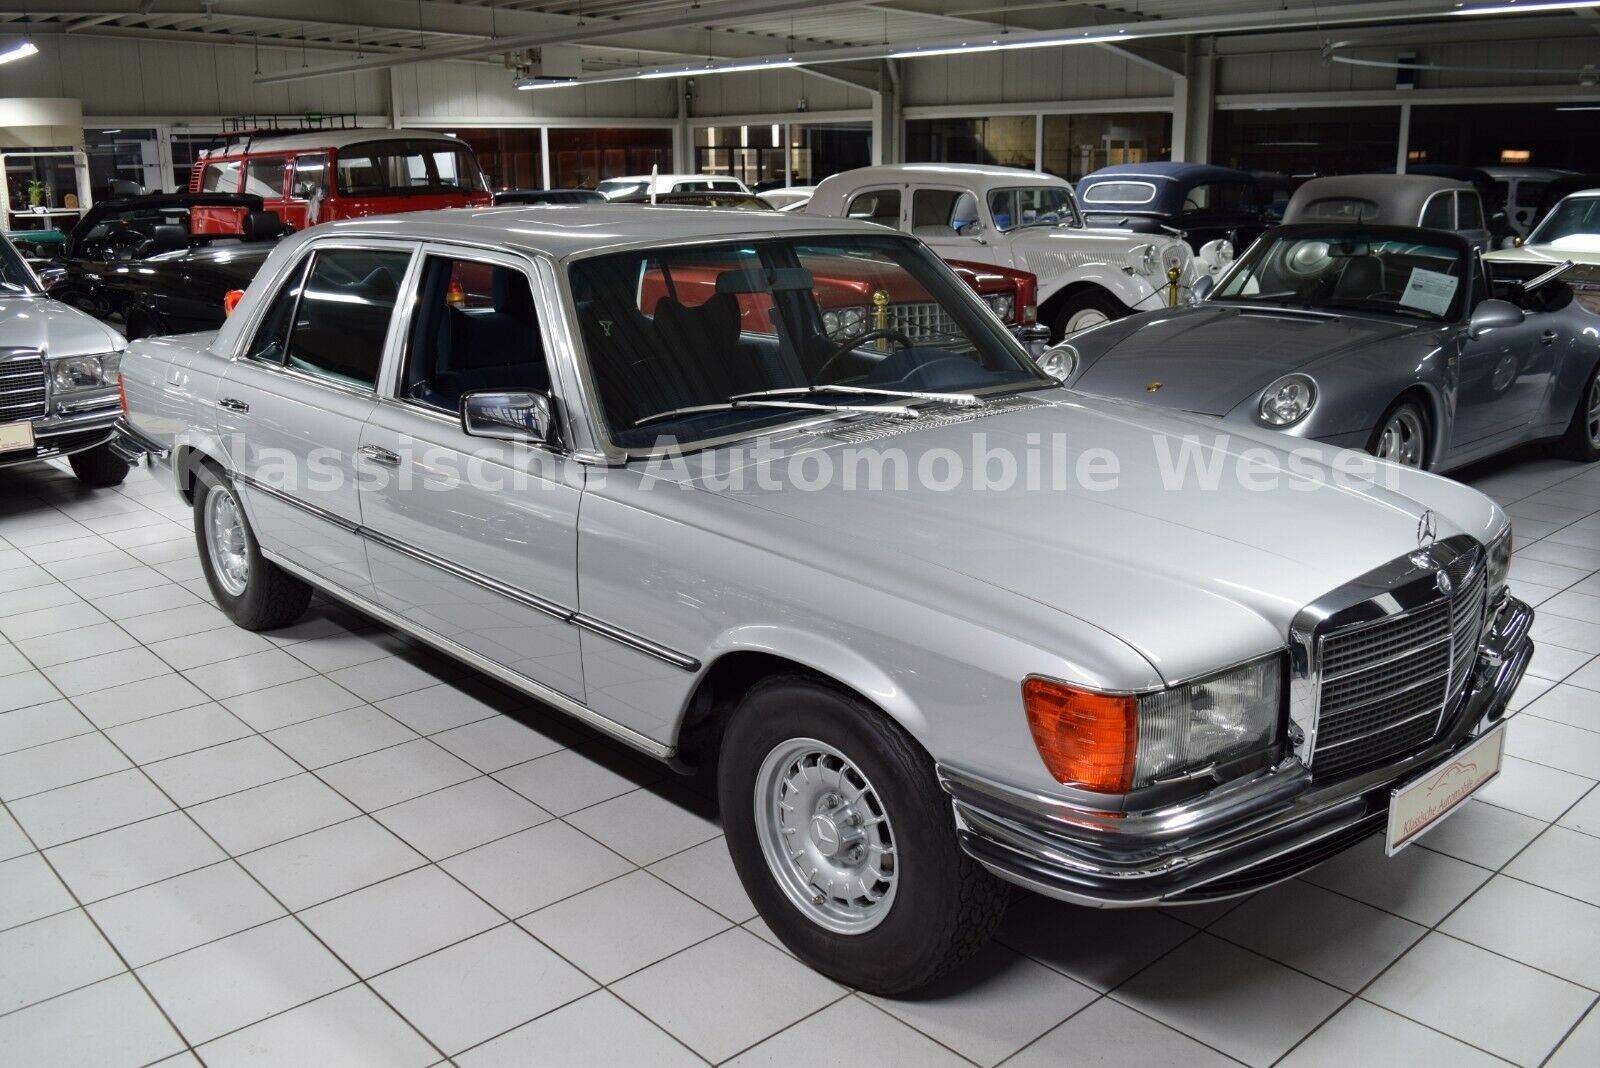 For Sale Mercedes Benz 450 Sel 6 9 1979 Offered For Gbp 50 370